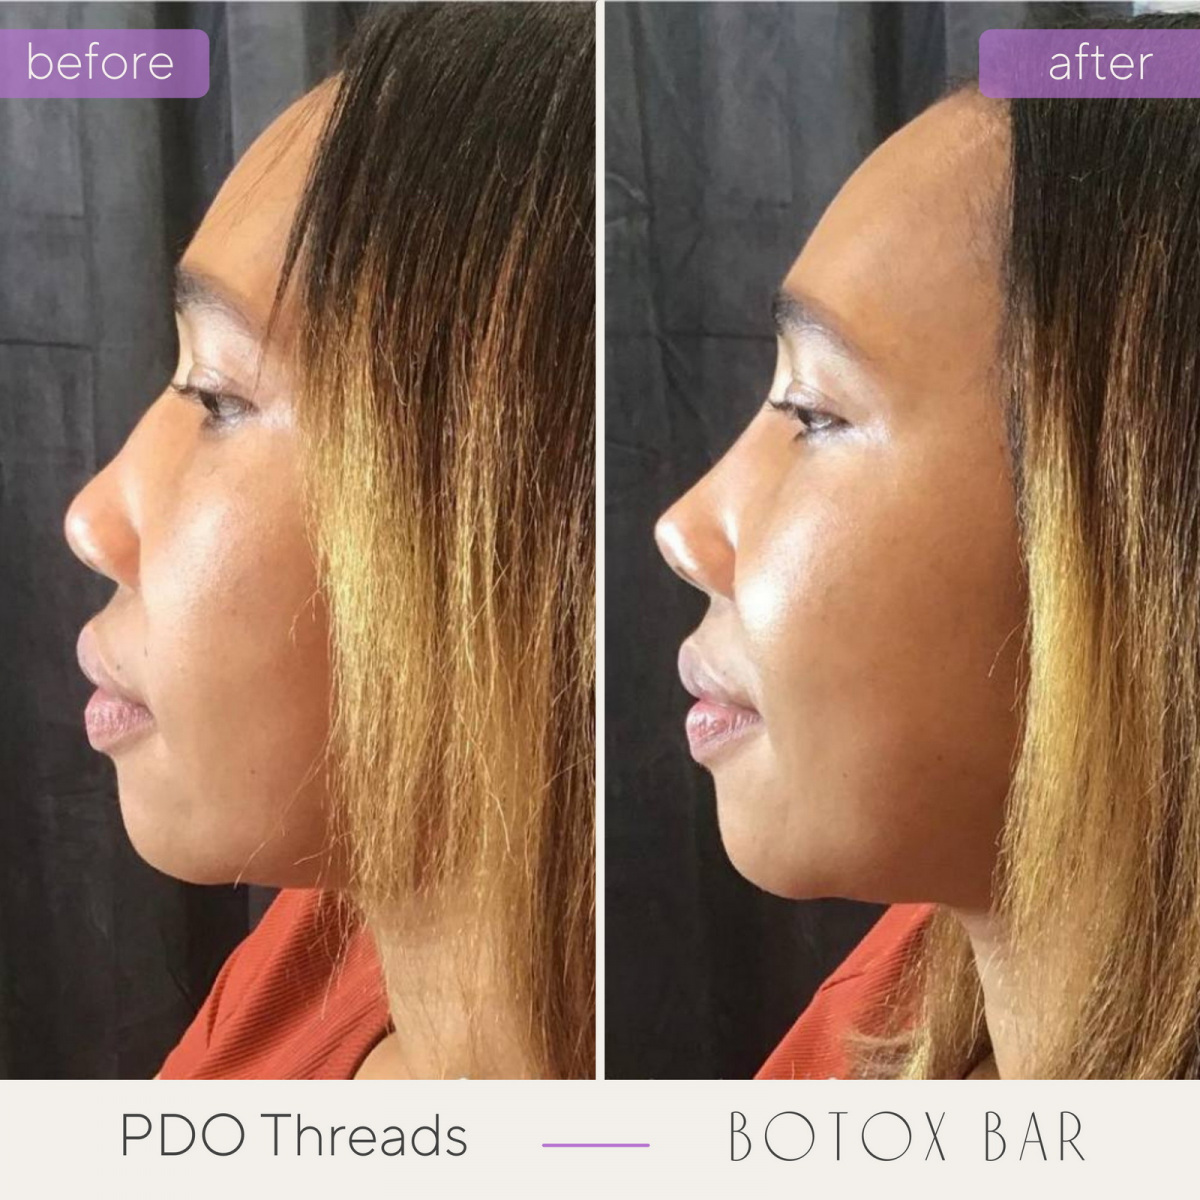 Before and After Liquid Nose Job in The Botox Bar and Aesthetics at Dallas & Sherman, TX